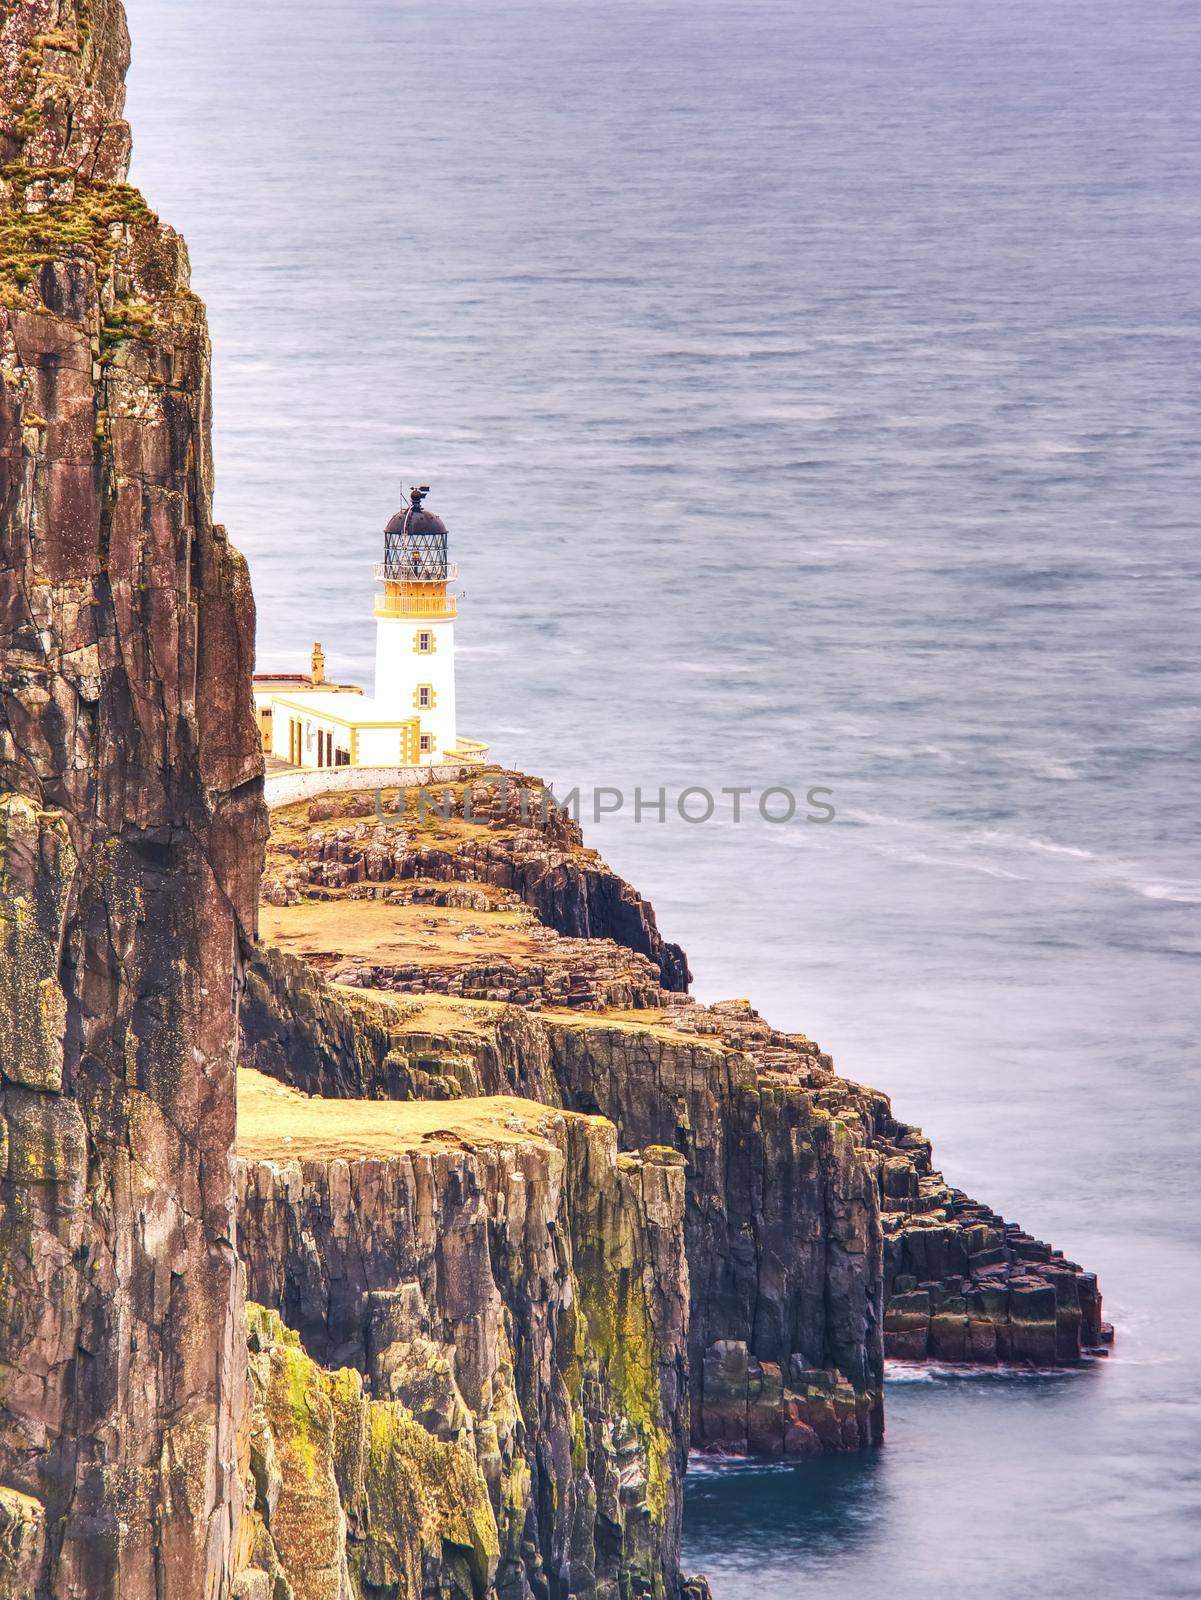 Neist Point peninsula with lighthouse is a very photographed place and tourist attraction on Isle of Skye, Scotland. All travelers must see